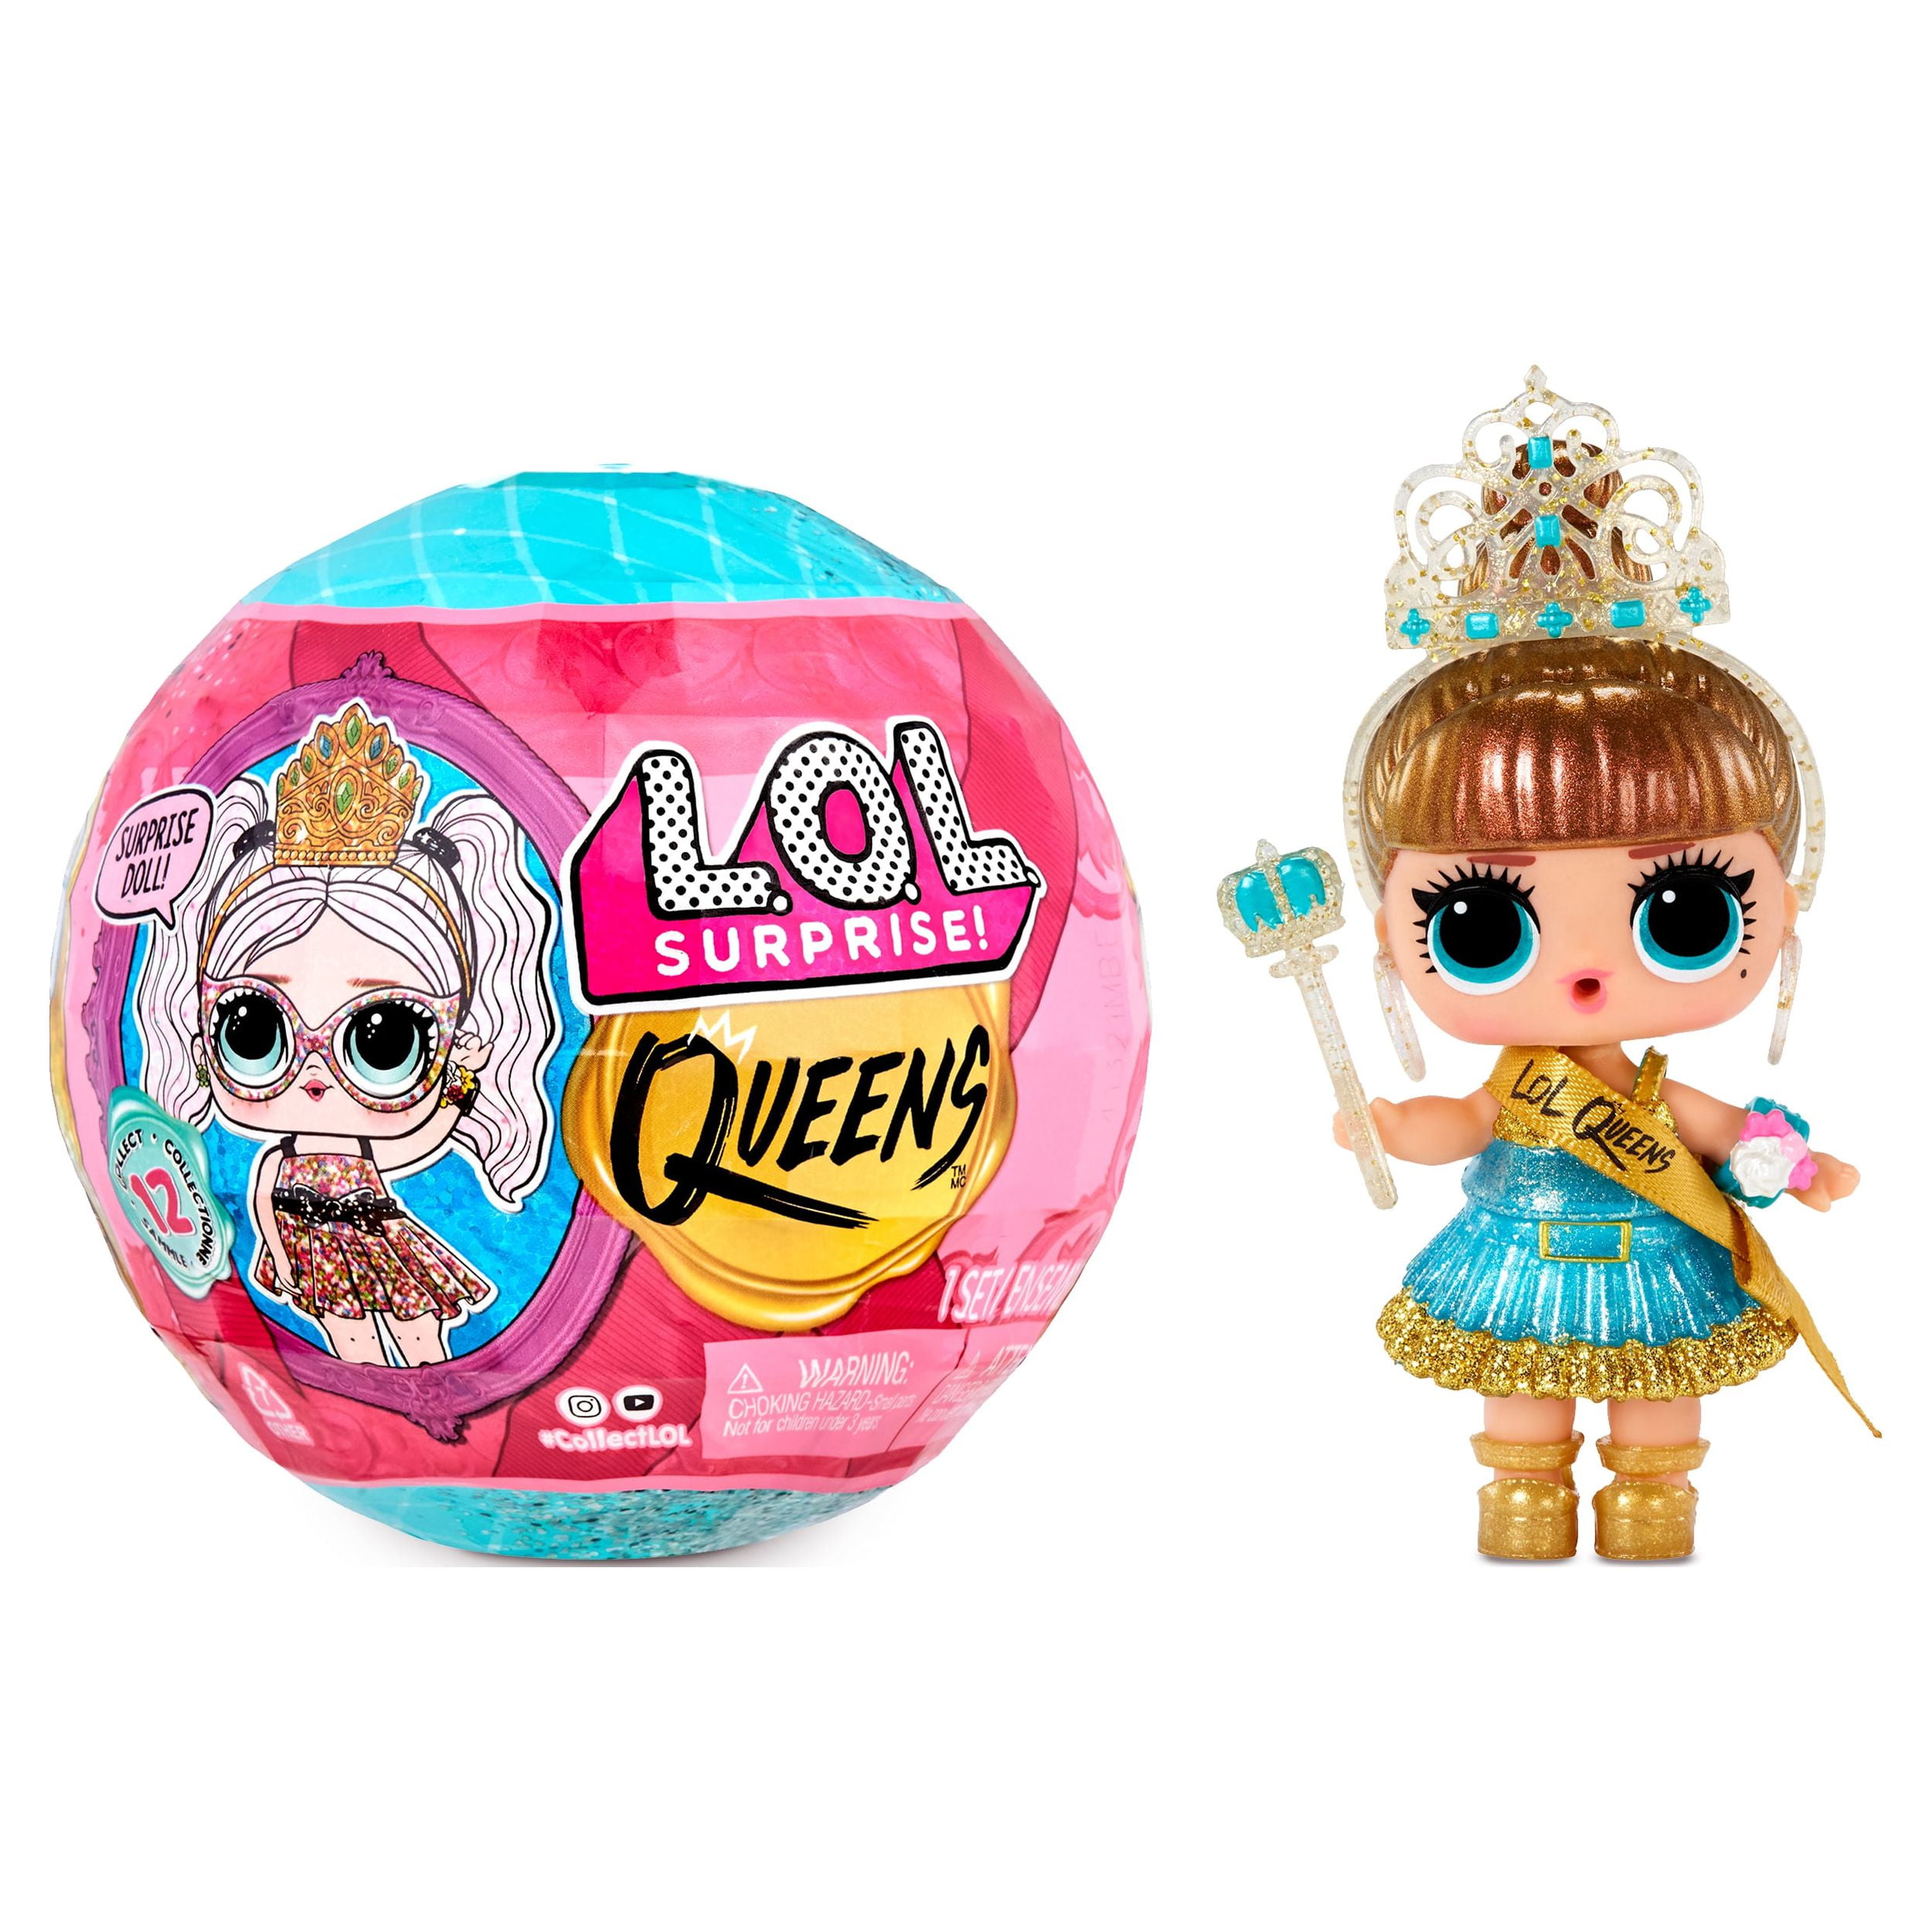 lol surprise queens dolls with 9 surprises including doll